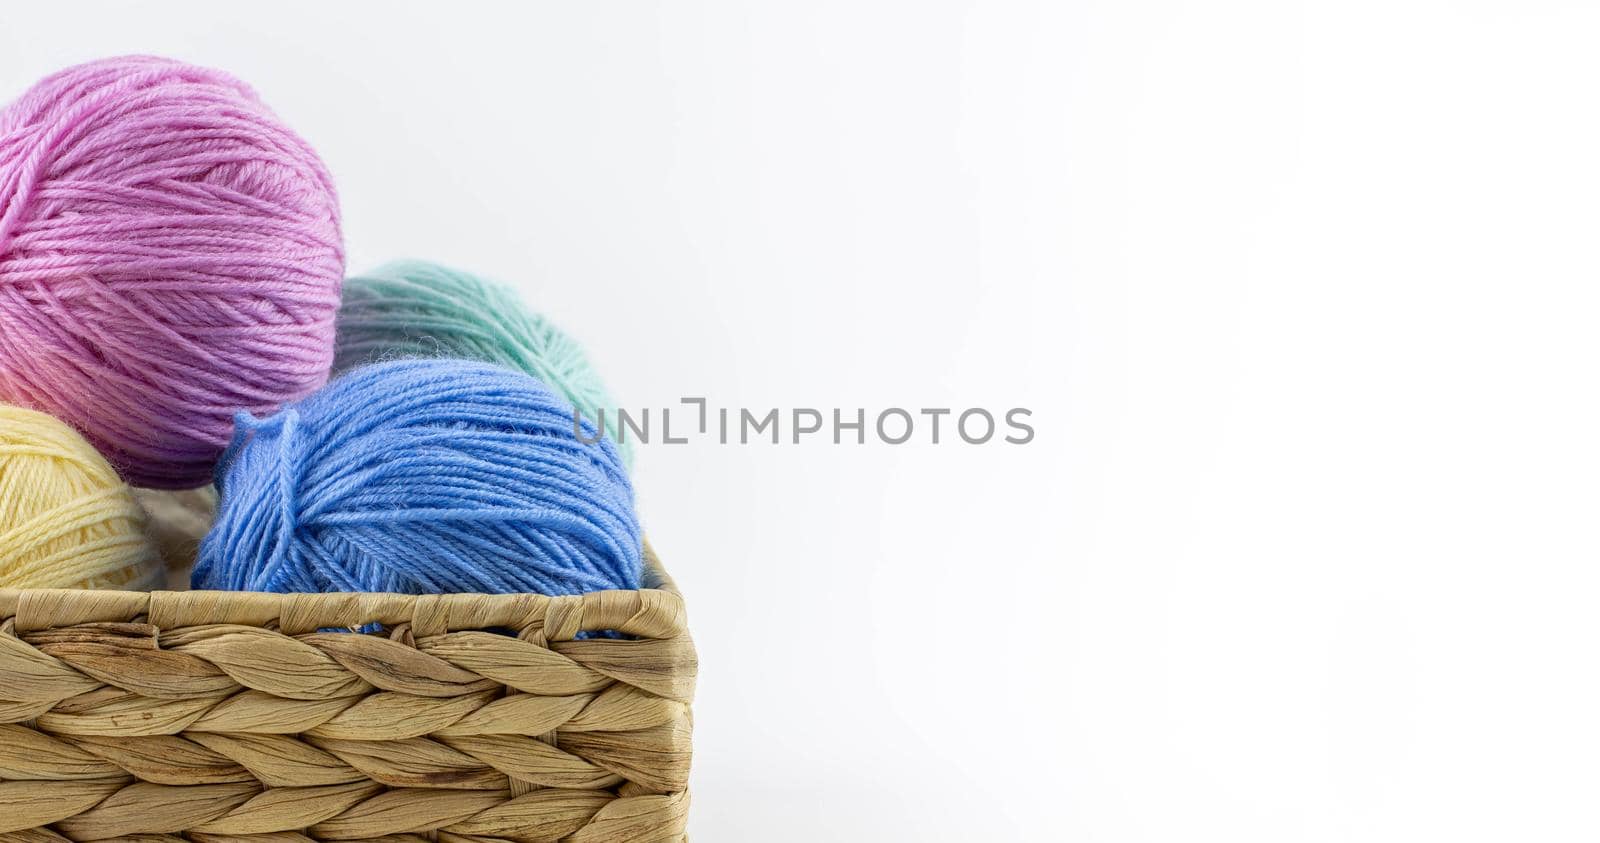 Multi-colored balls of yarn for knitting lie in a wicker basket. Place for text.